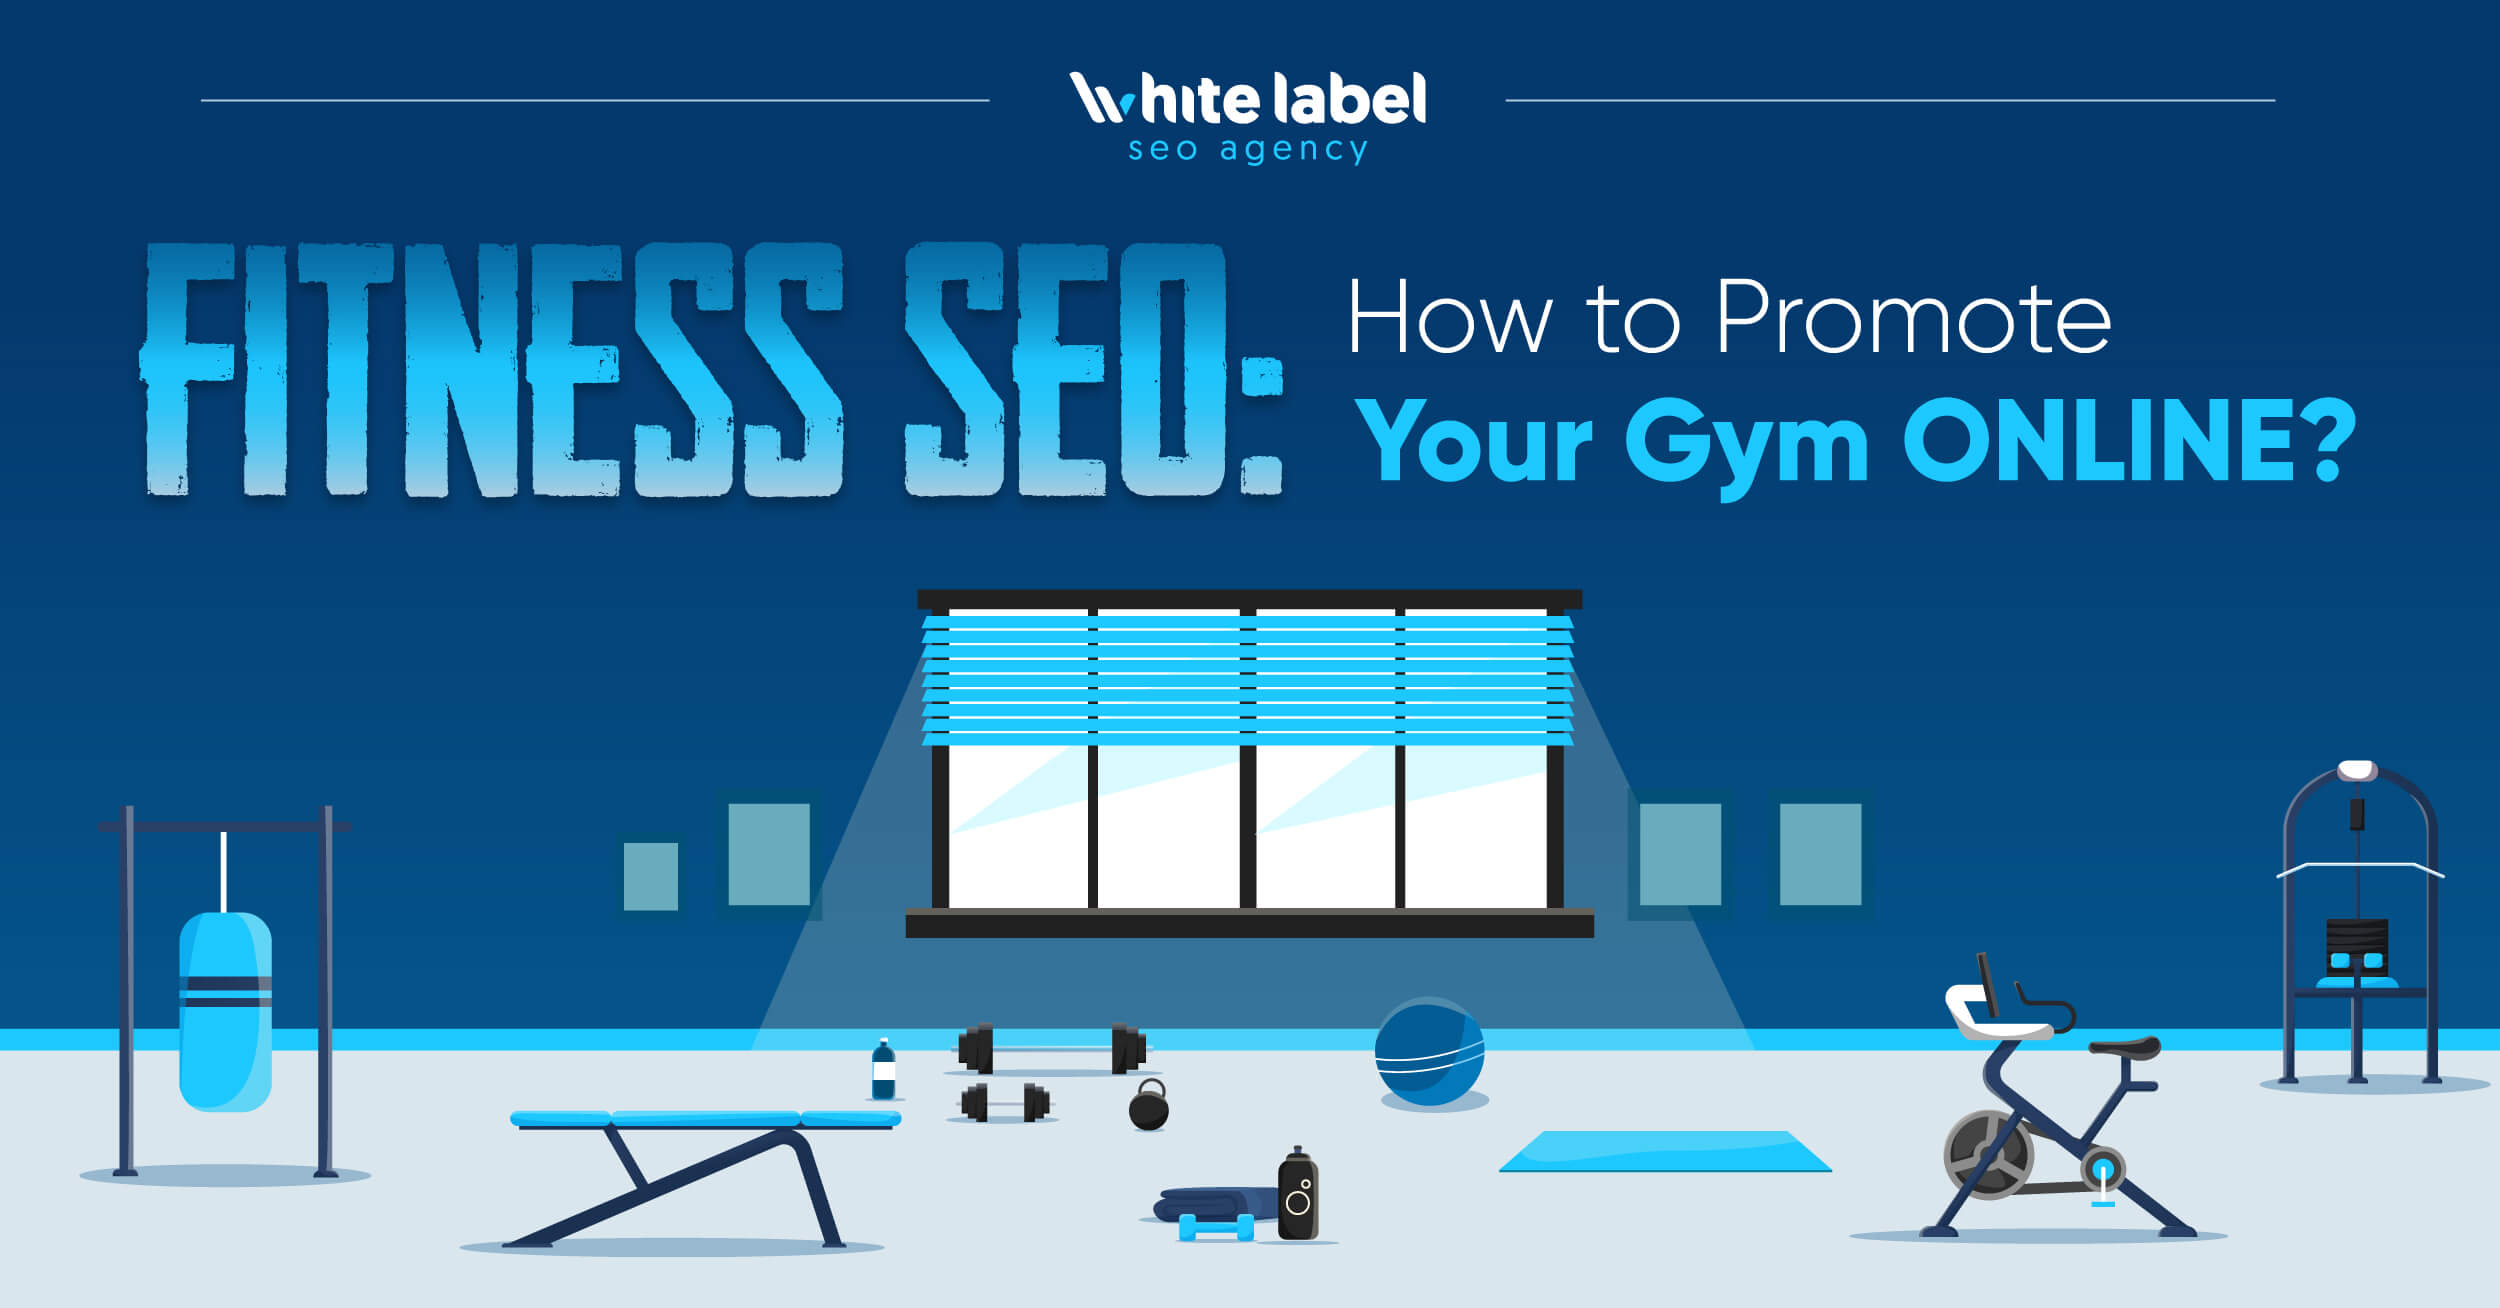 Fitness SEO: How to Promote Your Gym Online? (Infographic)